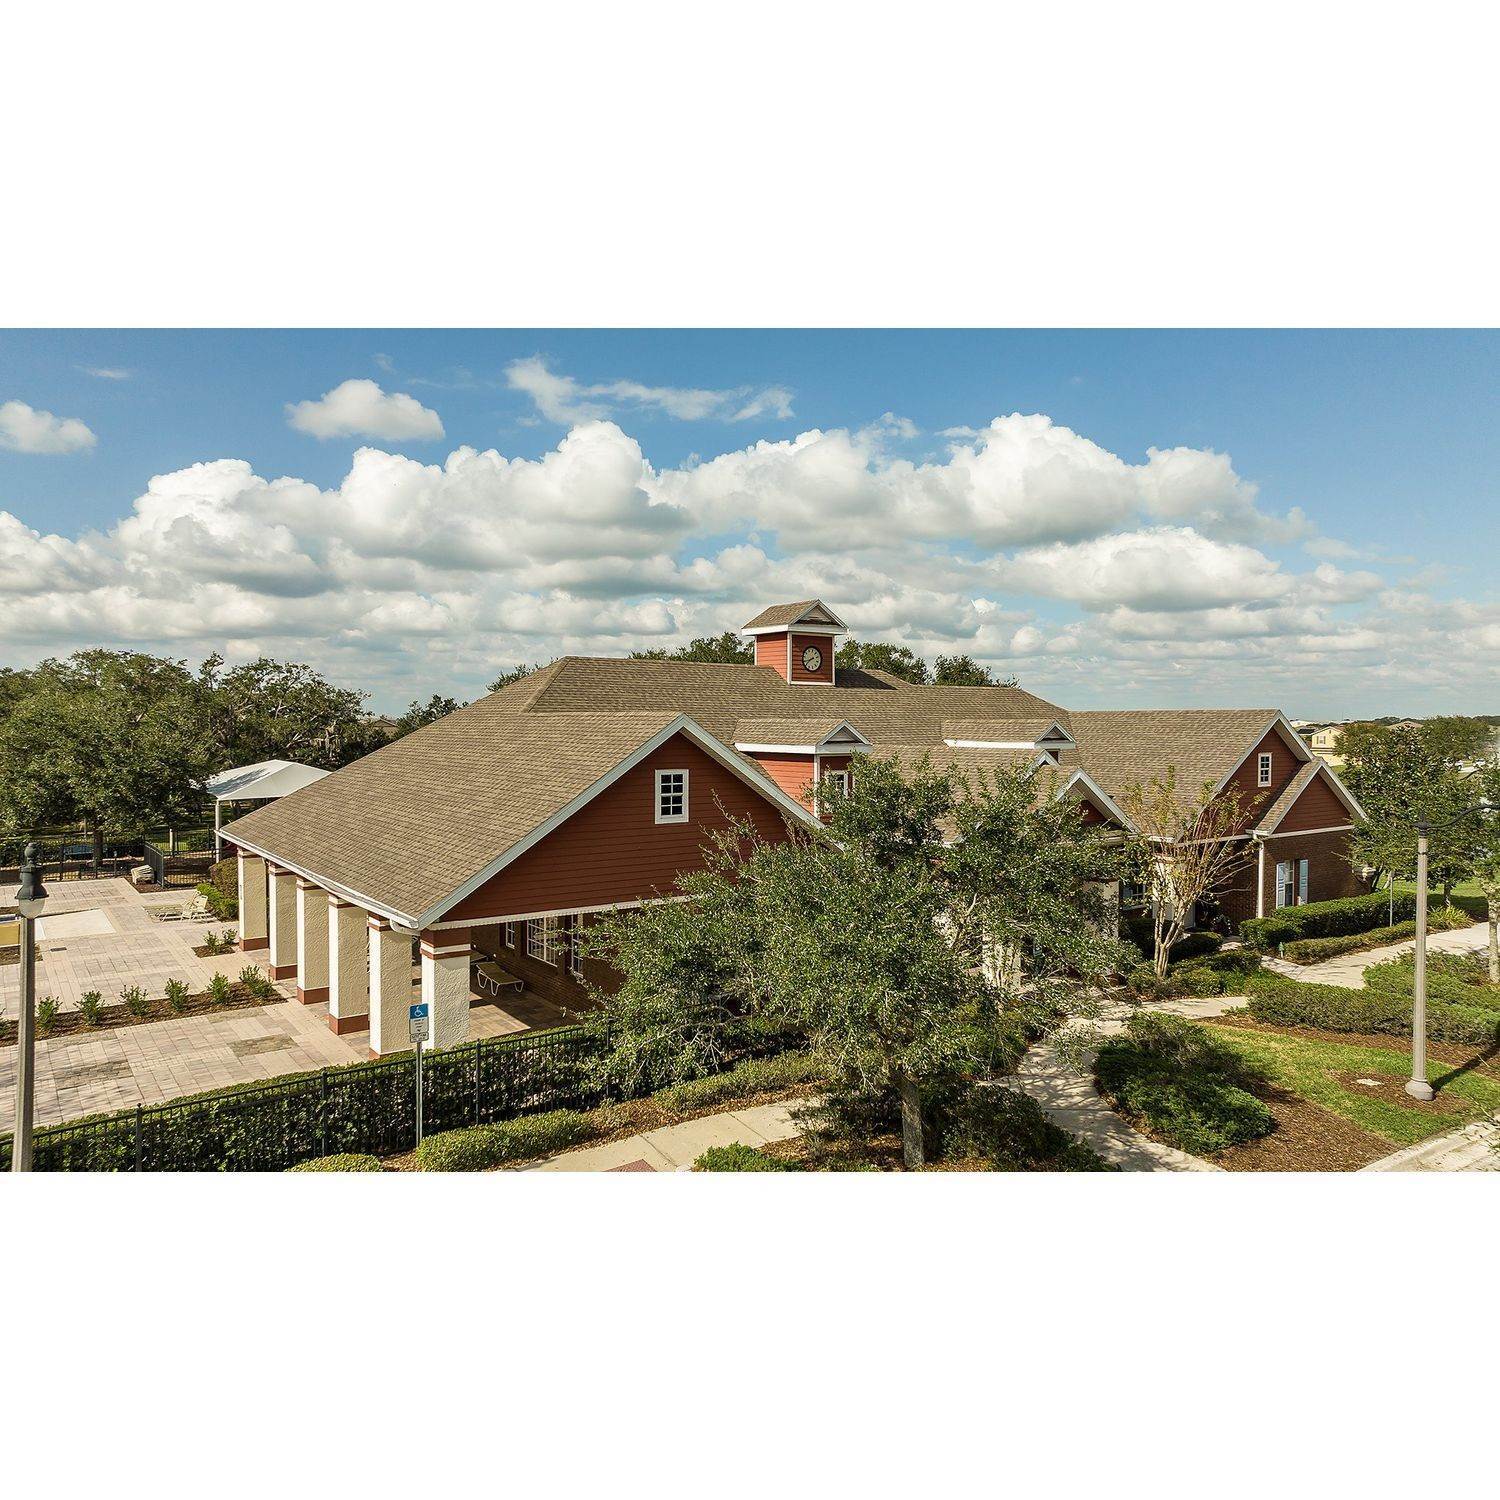 7. The Townhomes at Anthem Park Gebäude bei 4590 Calvary Way, St. Cloud, FL 34769